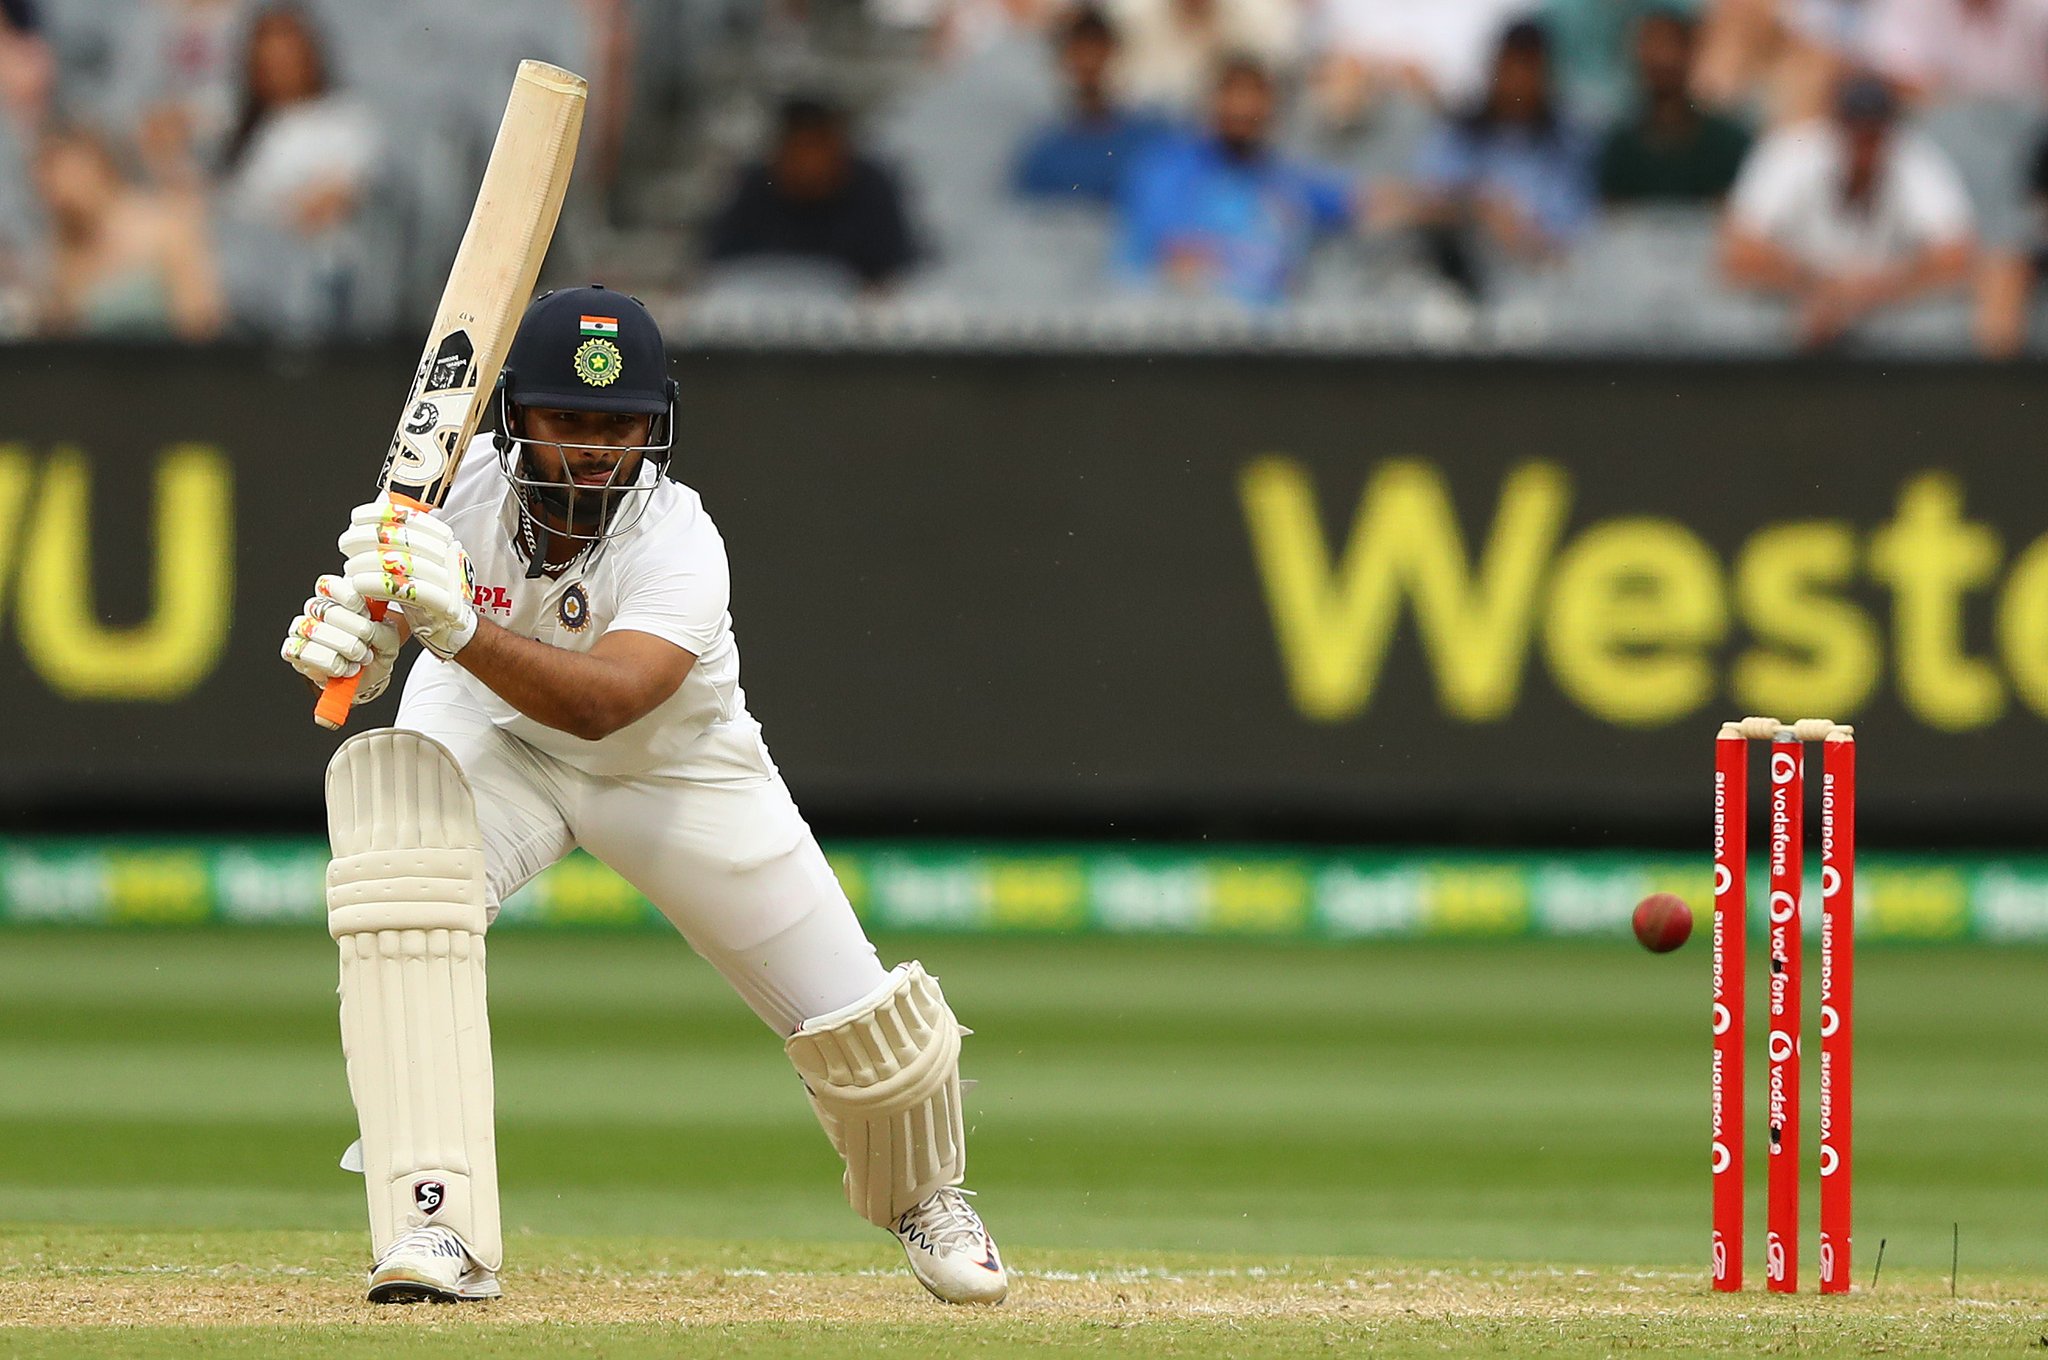 IND vs ENG | We could have applied ourselves better, says Rishabh Pant on India's 78 all-out in Leeds 